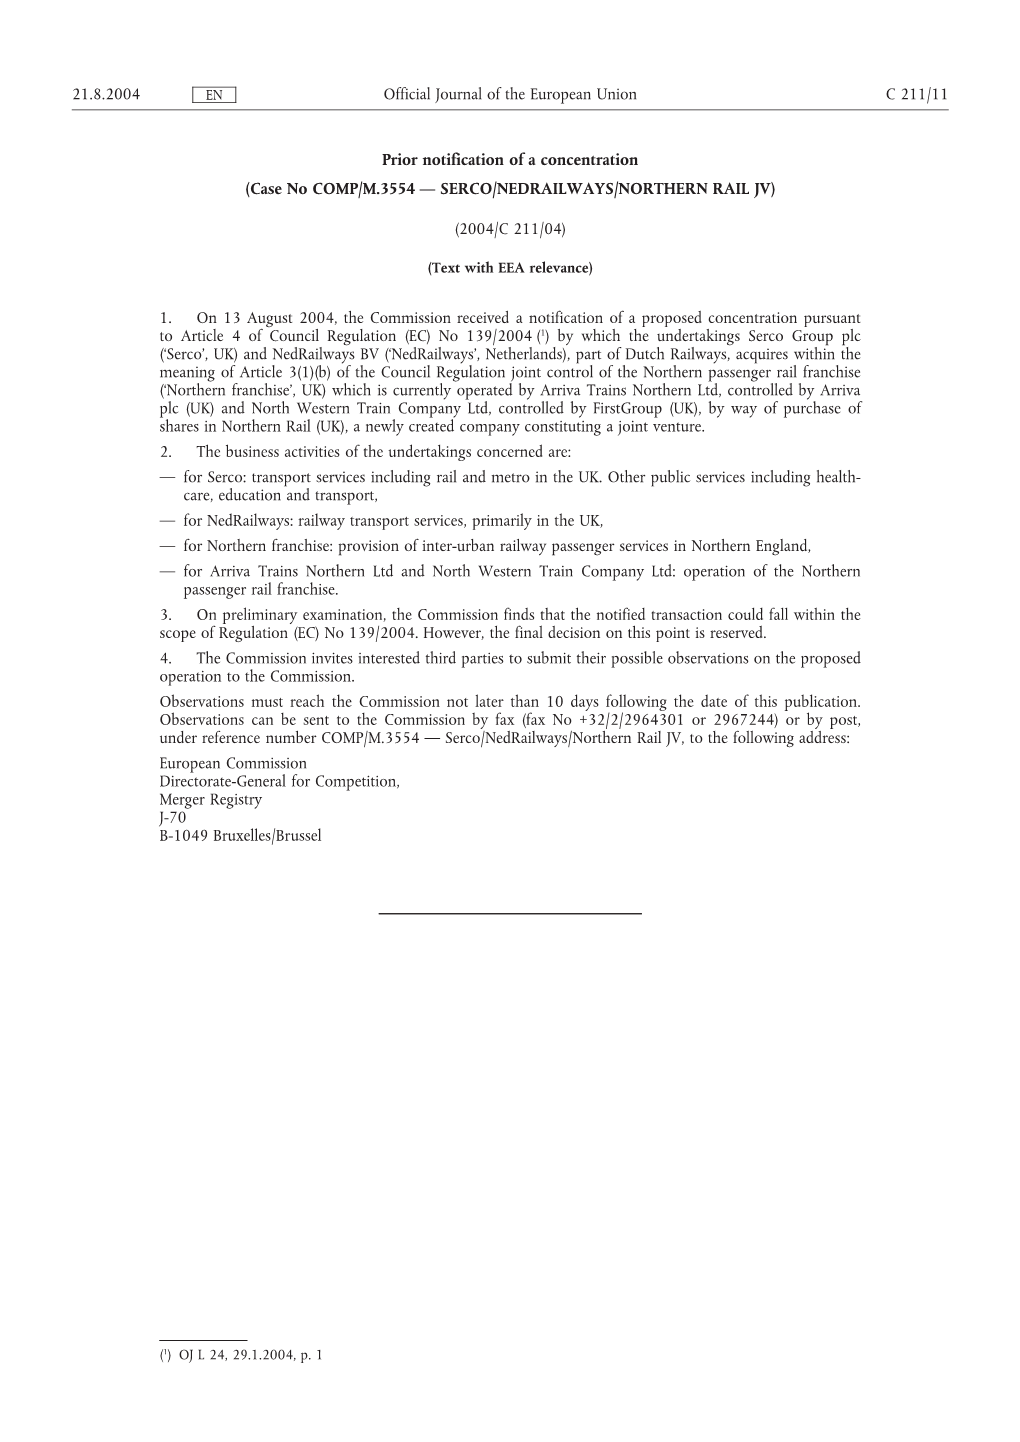 Prior Notification of a Concentration (Case No COMP/M.3554 — SERCO/NEDRAILWAYS/NORTHERN RAIL JV)